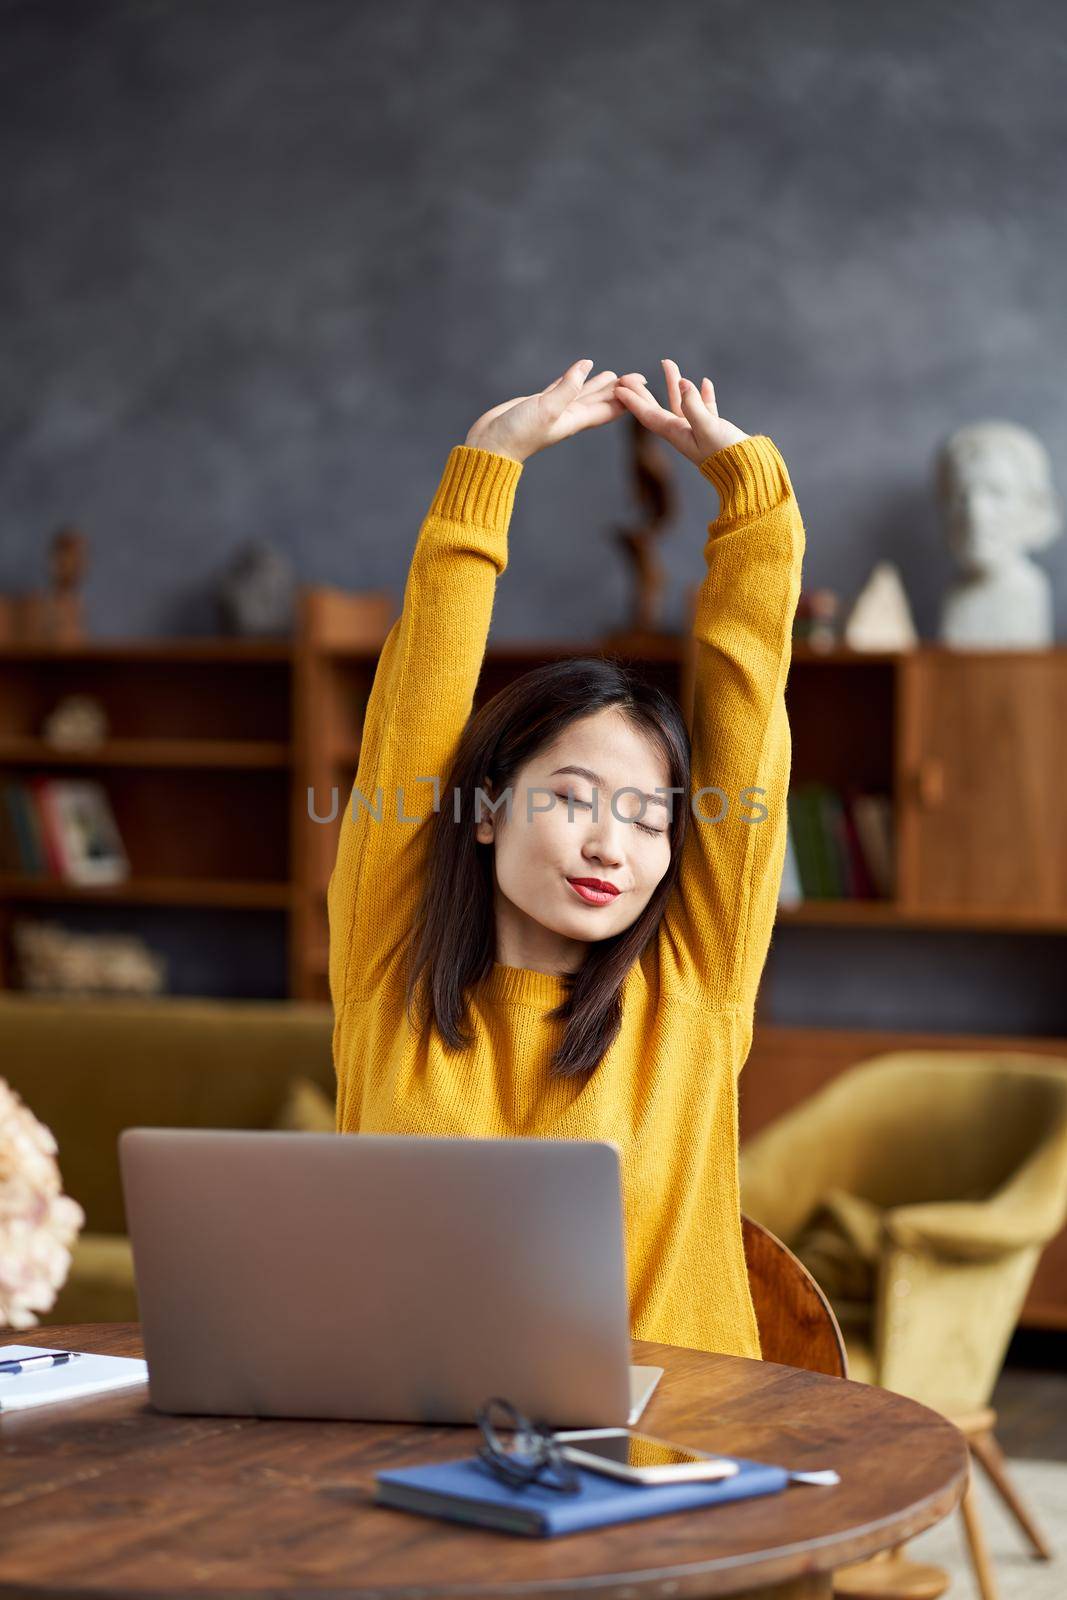 Asian woman working on laptop at home or in cafe stretching tiredly, pulling her hands up. Young lady in bright yellow jumper sits at desk. Vertical